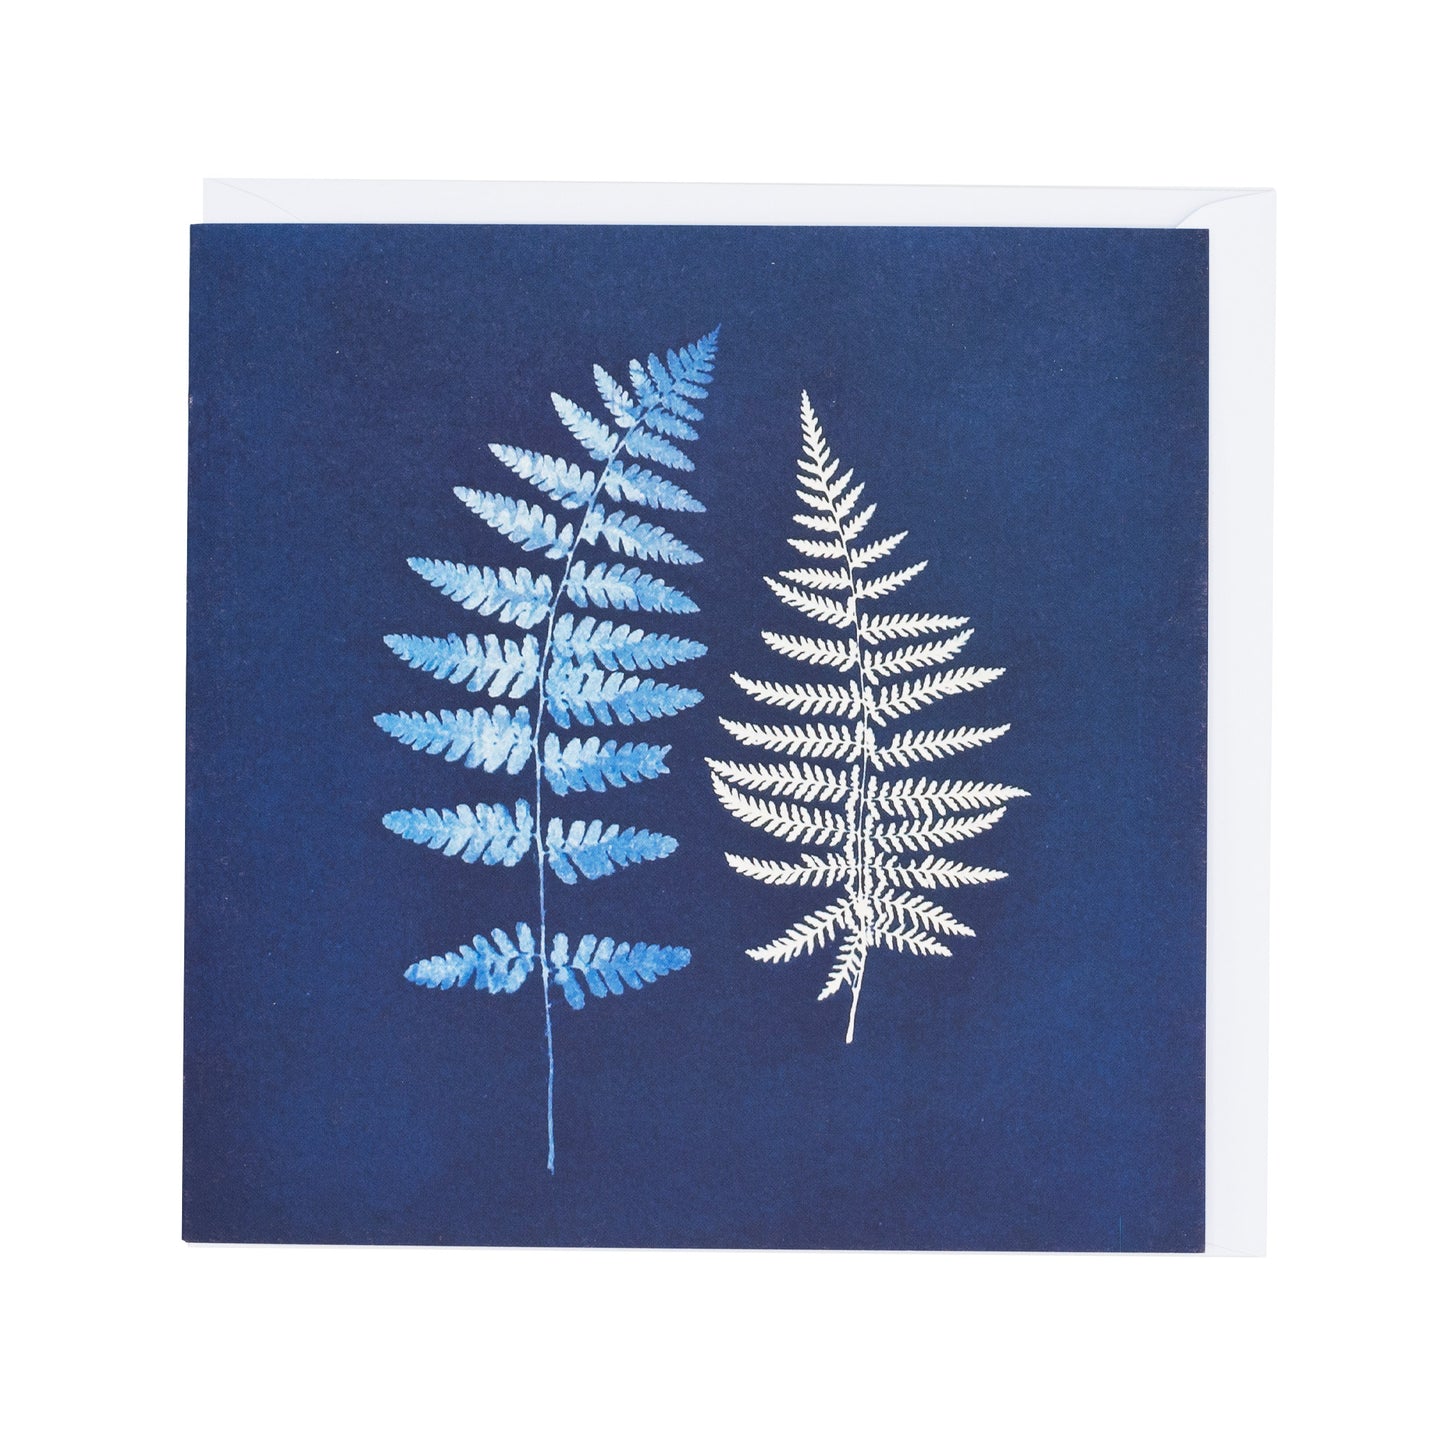 Greetings card of a cyaontype print of cow ferns